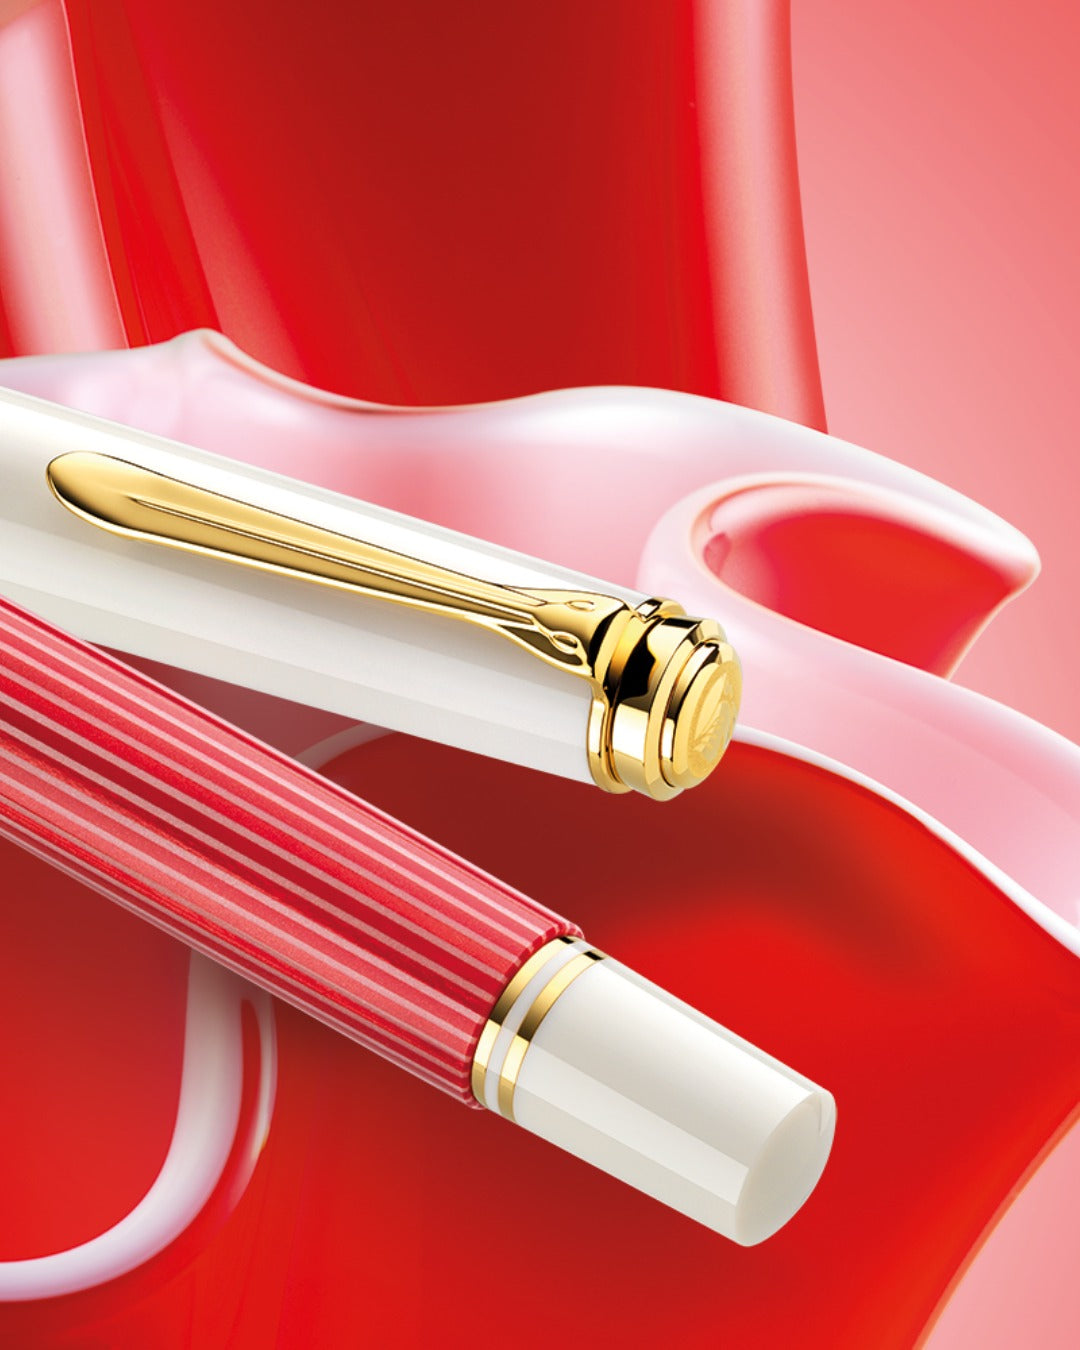 Pelikan Souverän M600 Red and White Fountain Pen - Pencraft the boutique